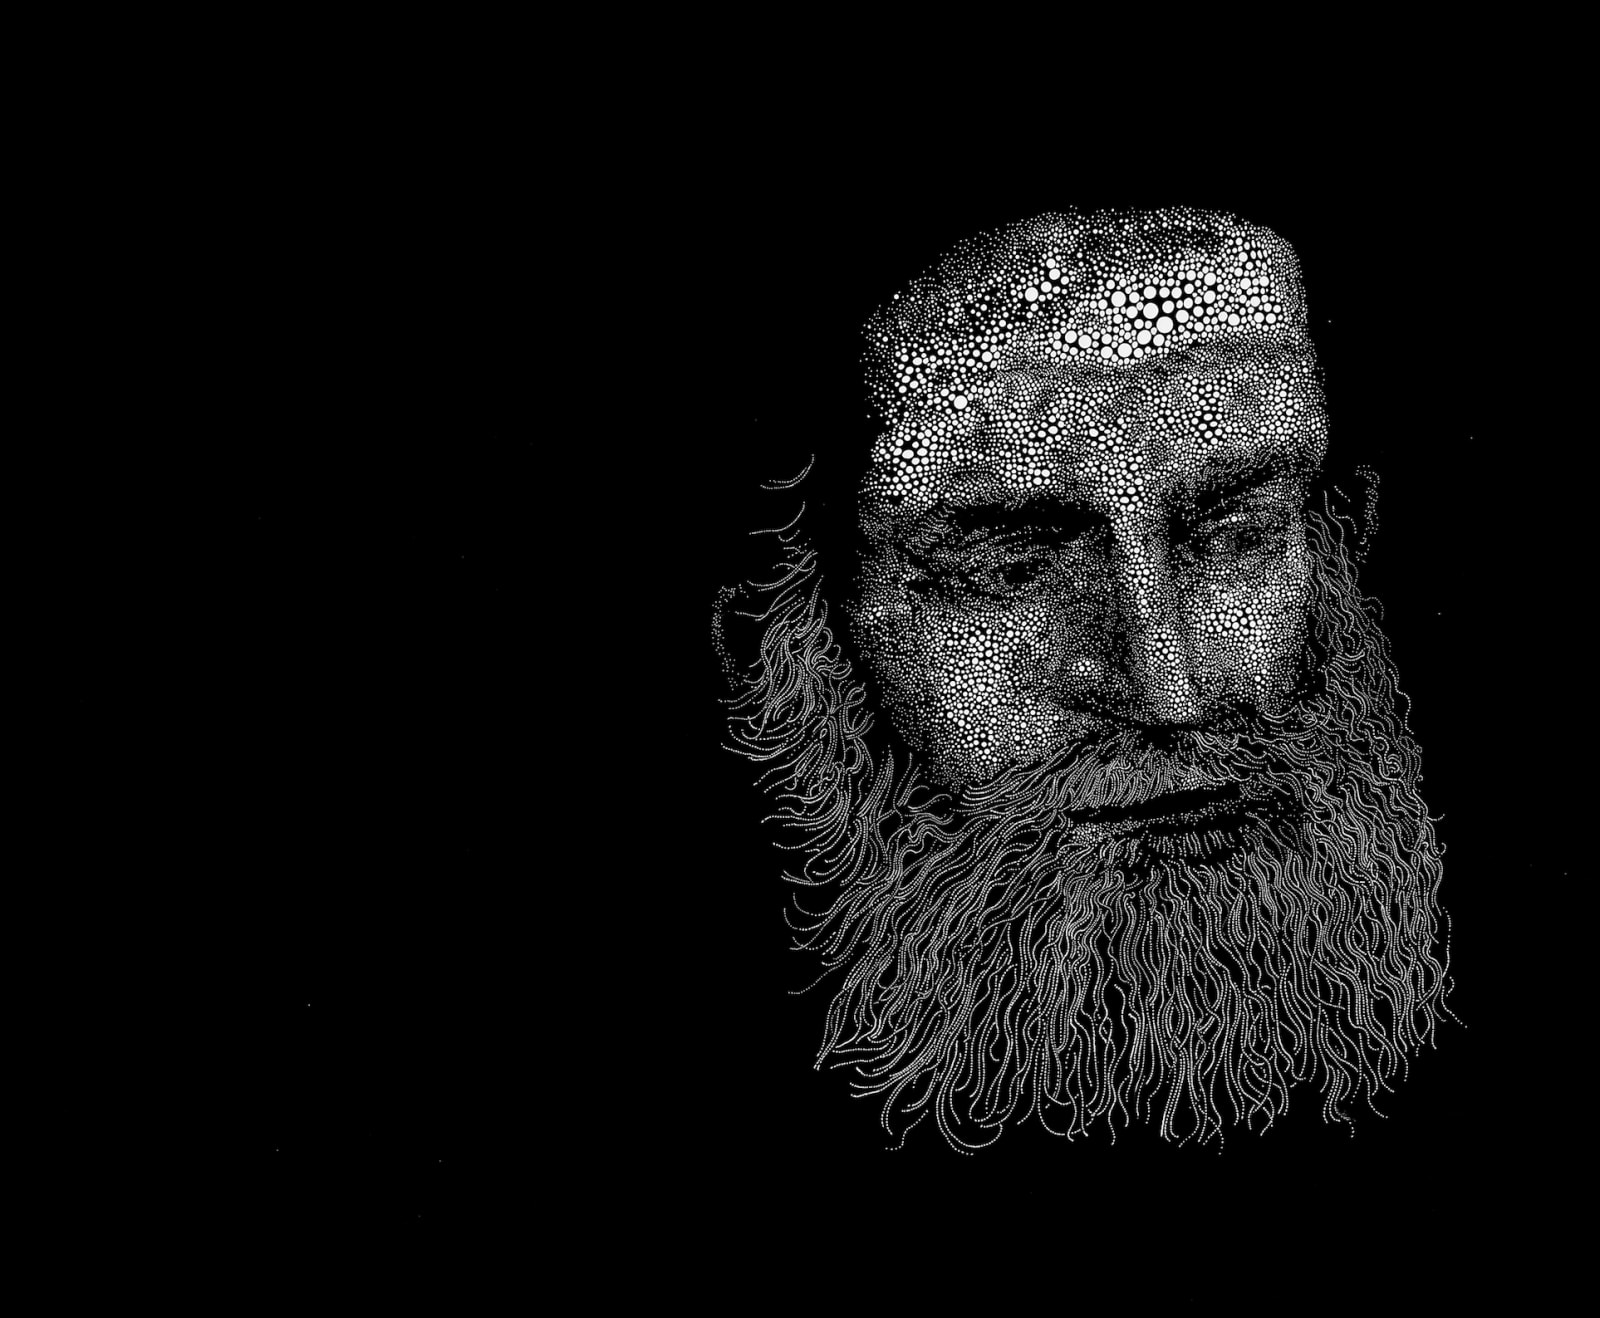 Sebastiaan Bremer Jerome black and white image of Old Masters style man's head painted with dots emerging from black background